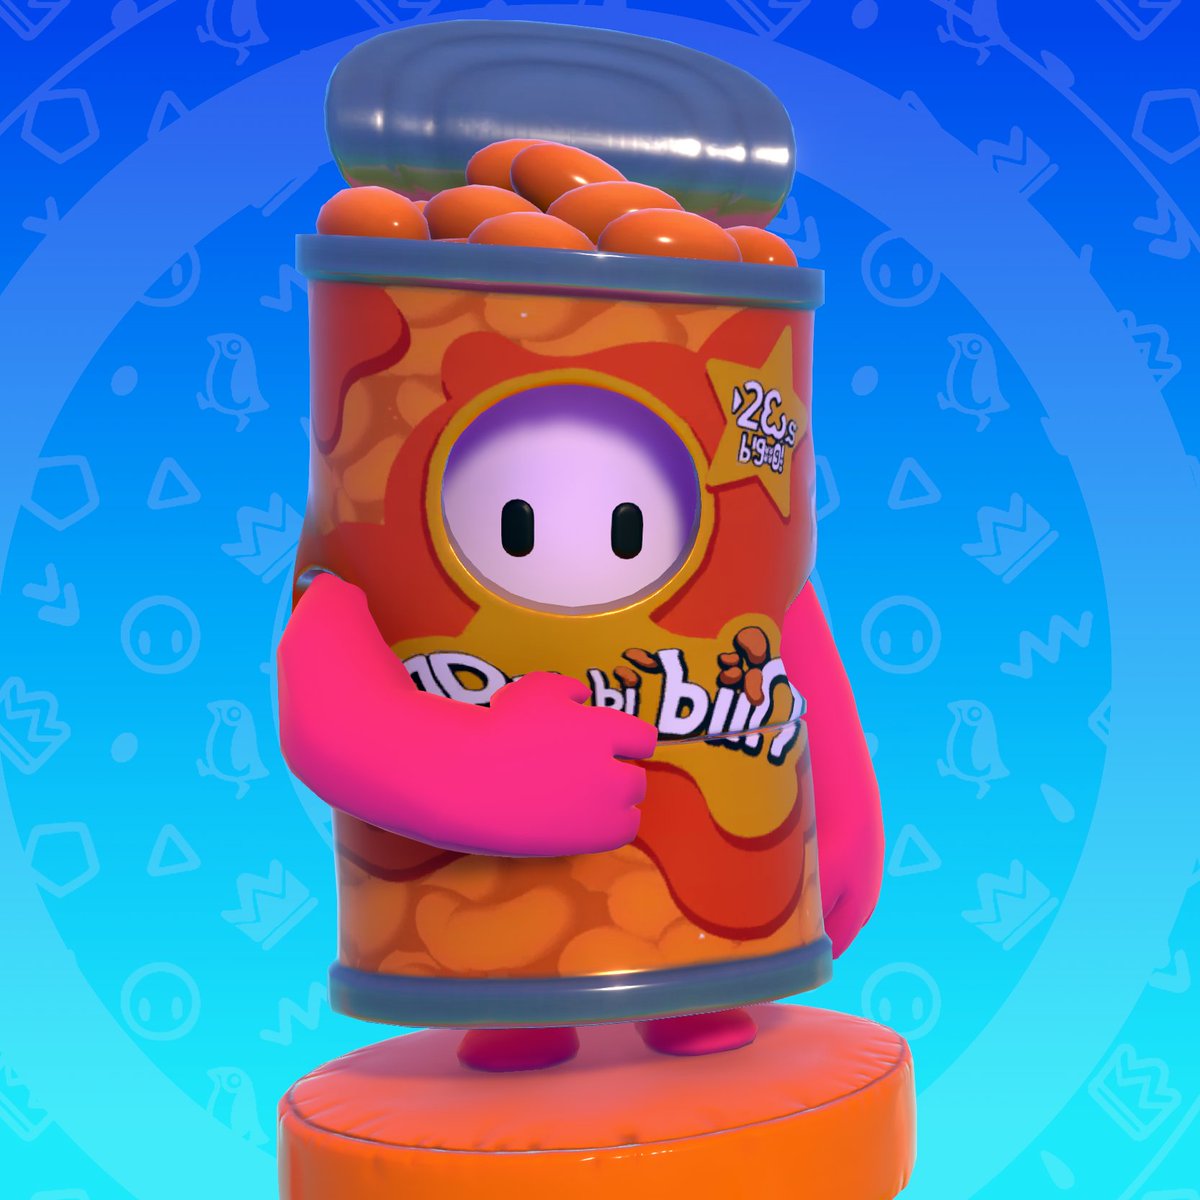 Dress up your bean in… beans?